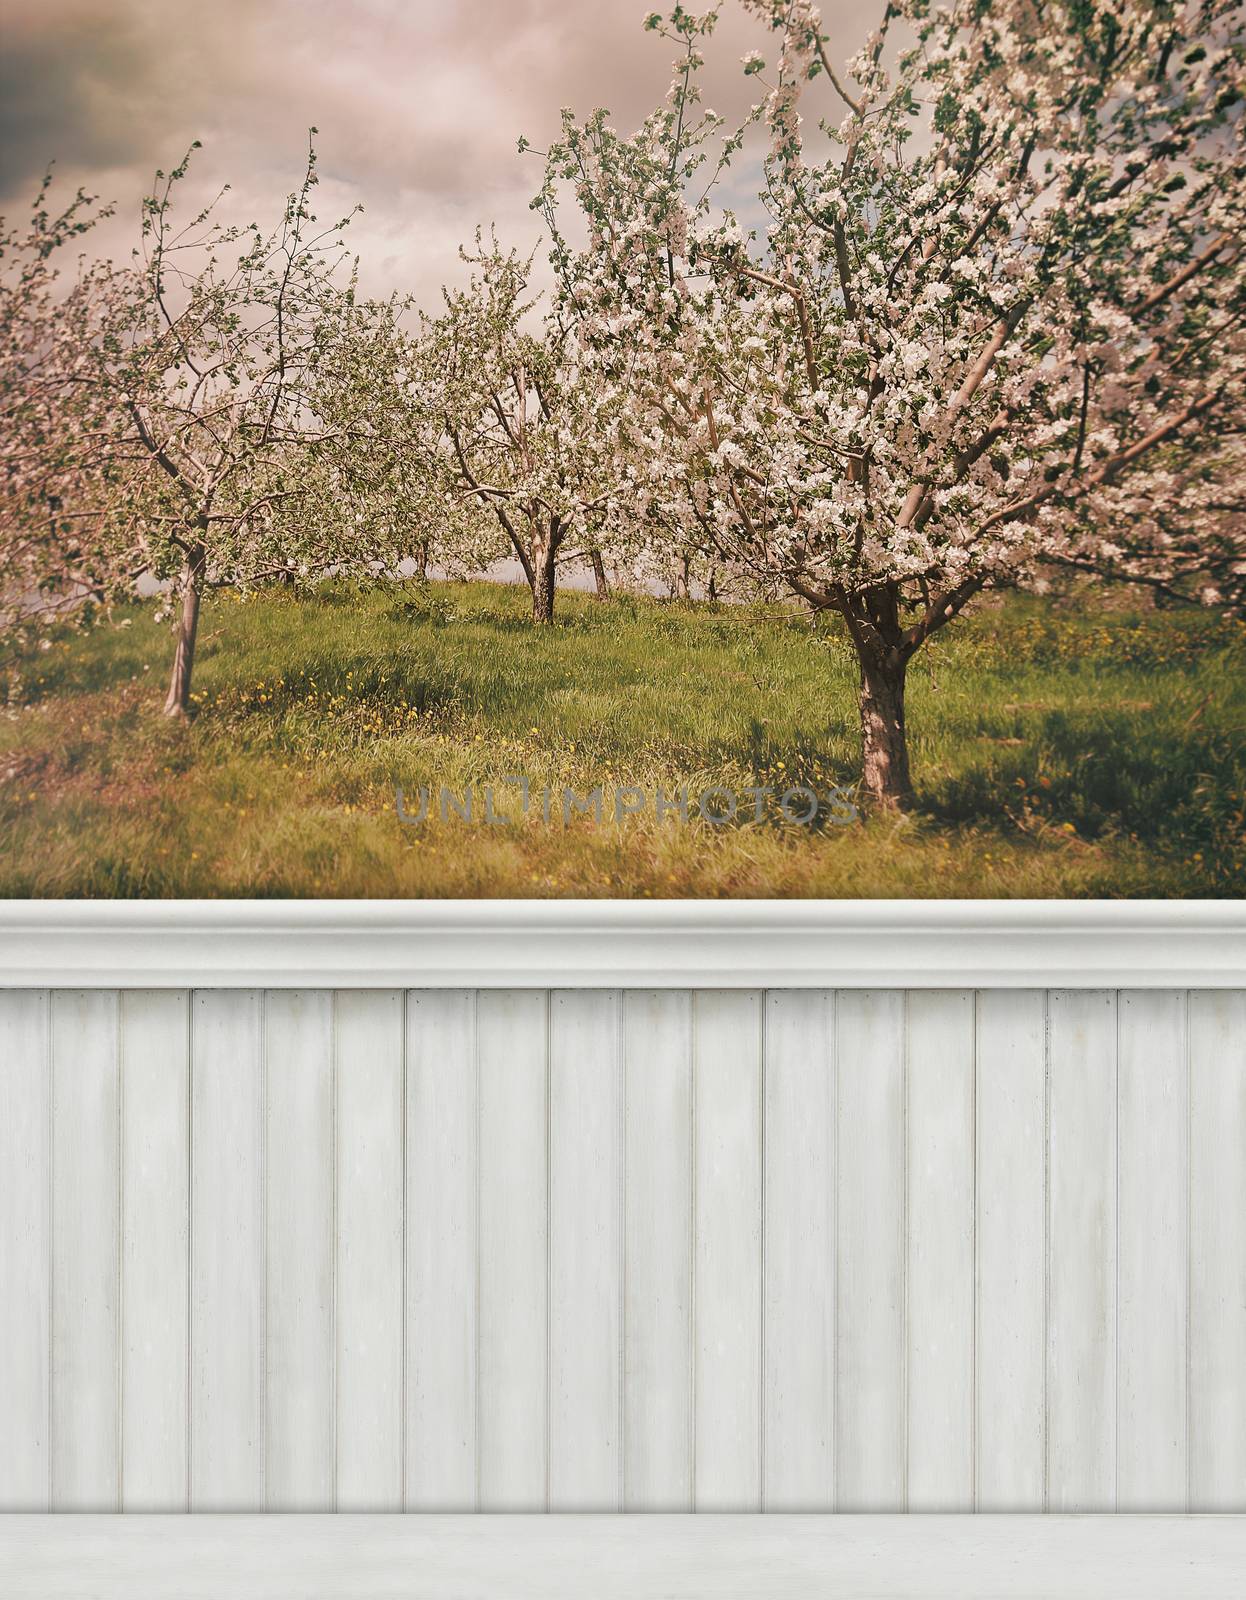 Spring wall background/backdrop by Sandralise